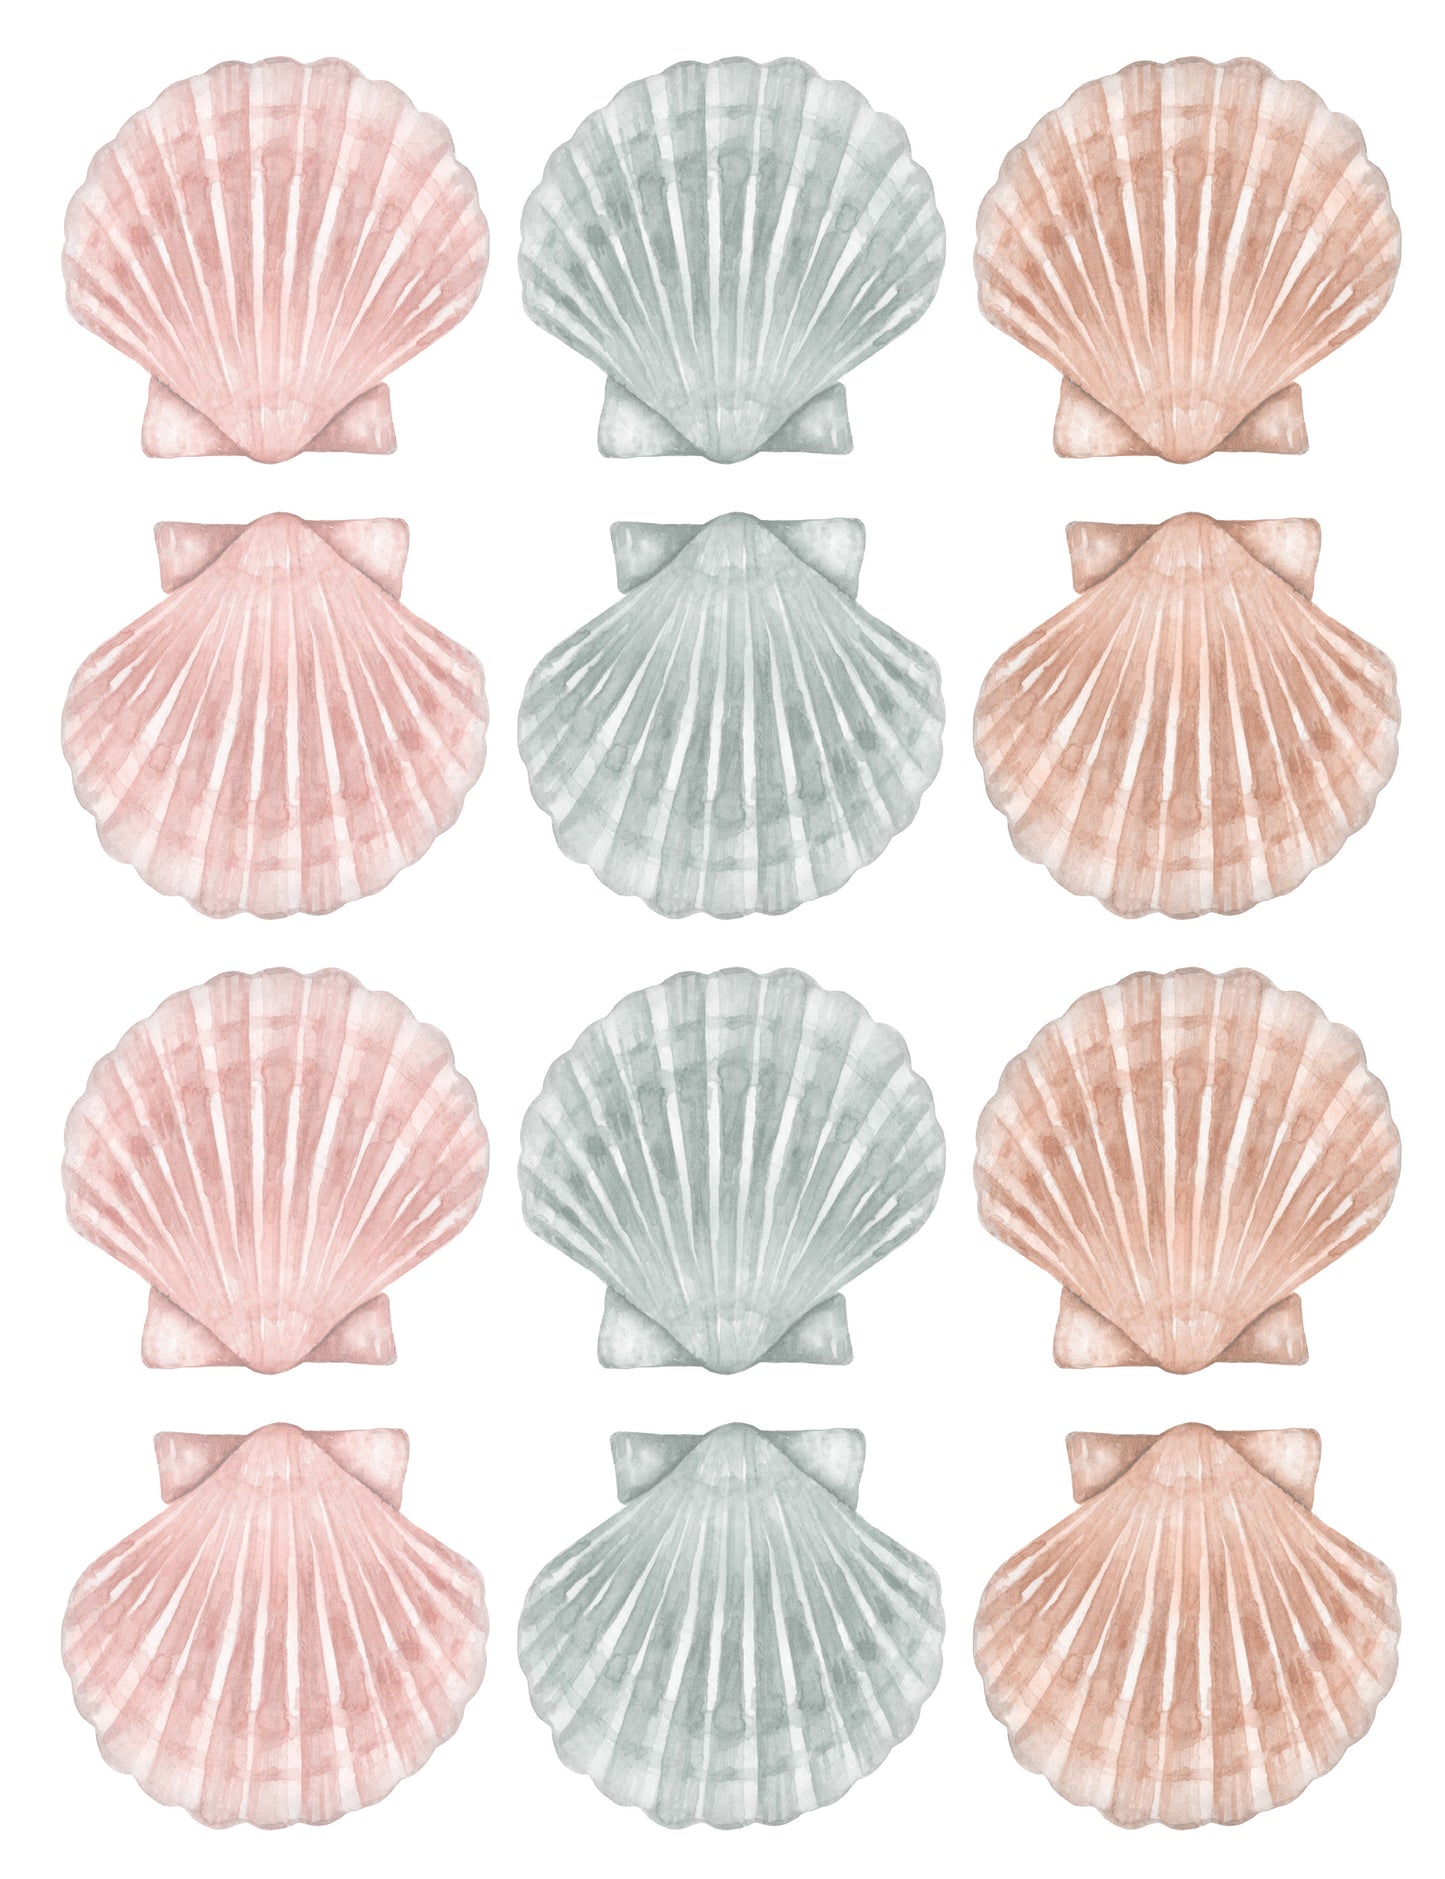 Seashell Wall Decals (Boho Set) - Wall Decals - Fable and Fawn 